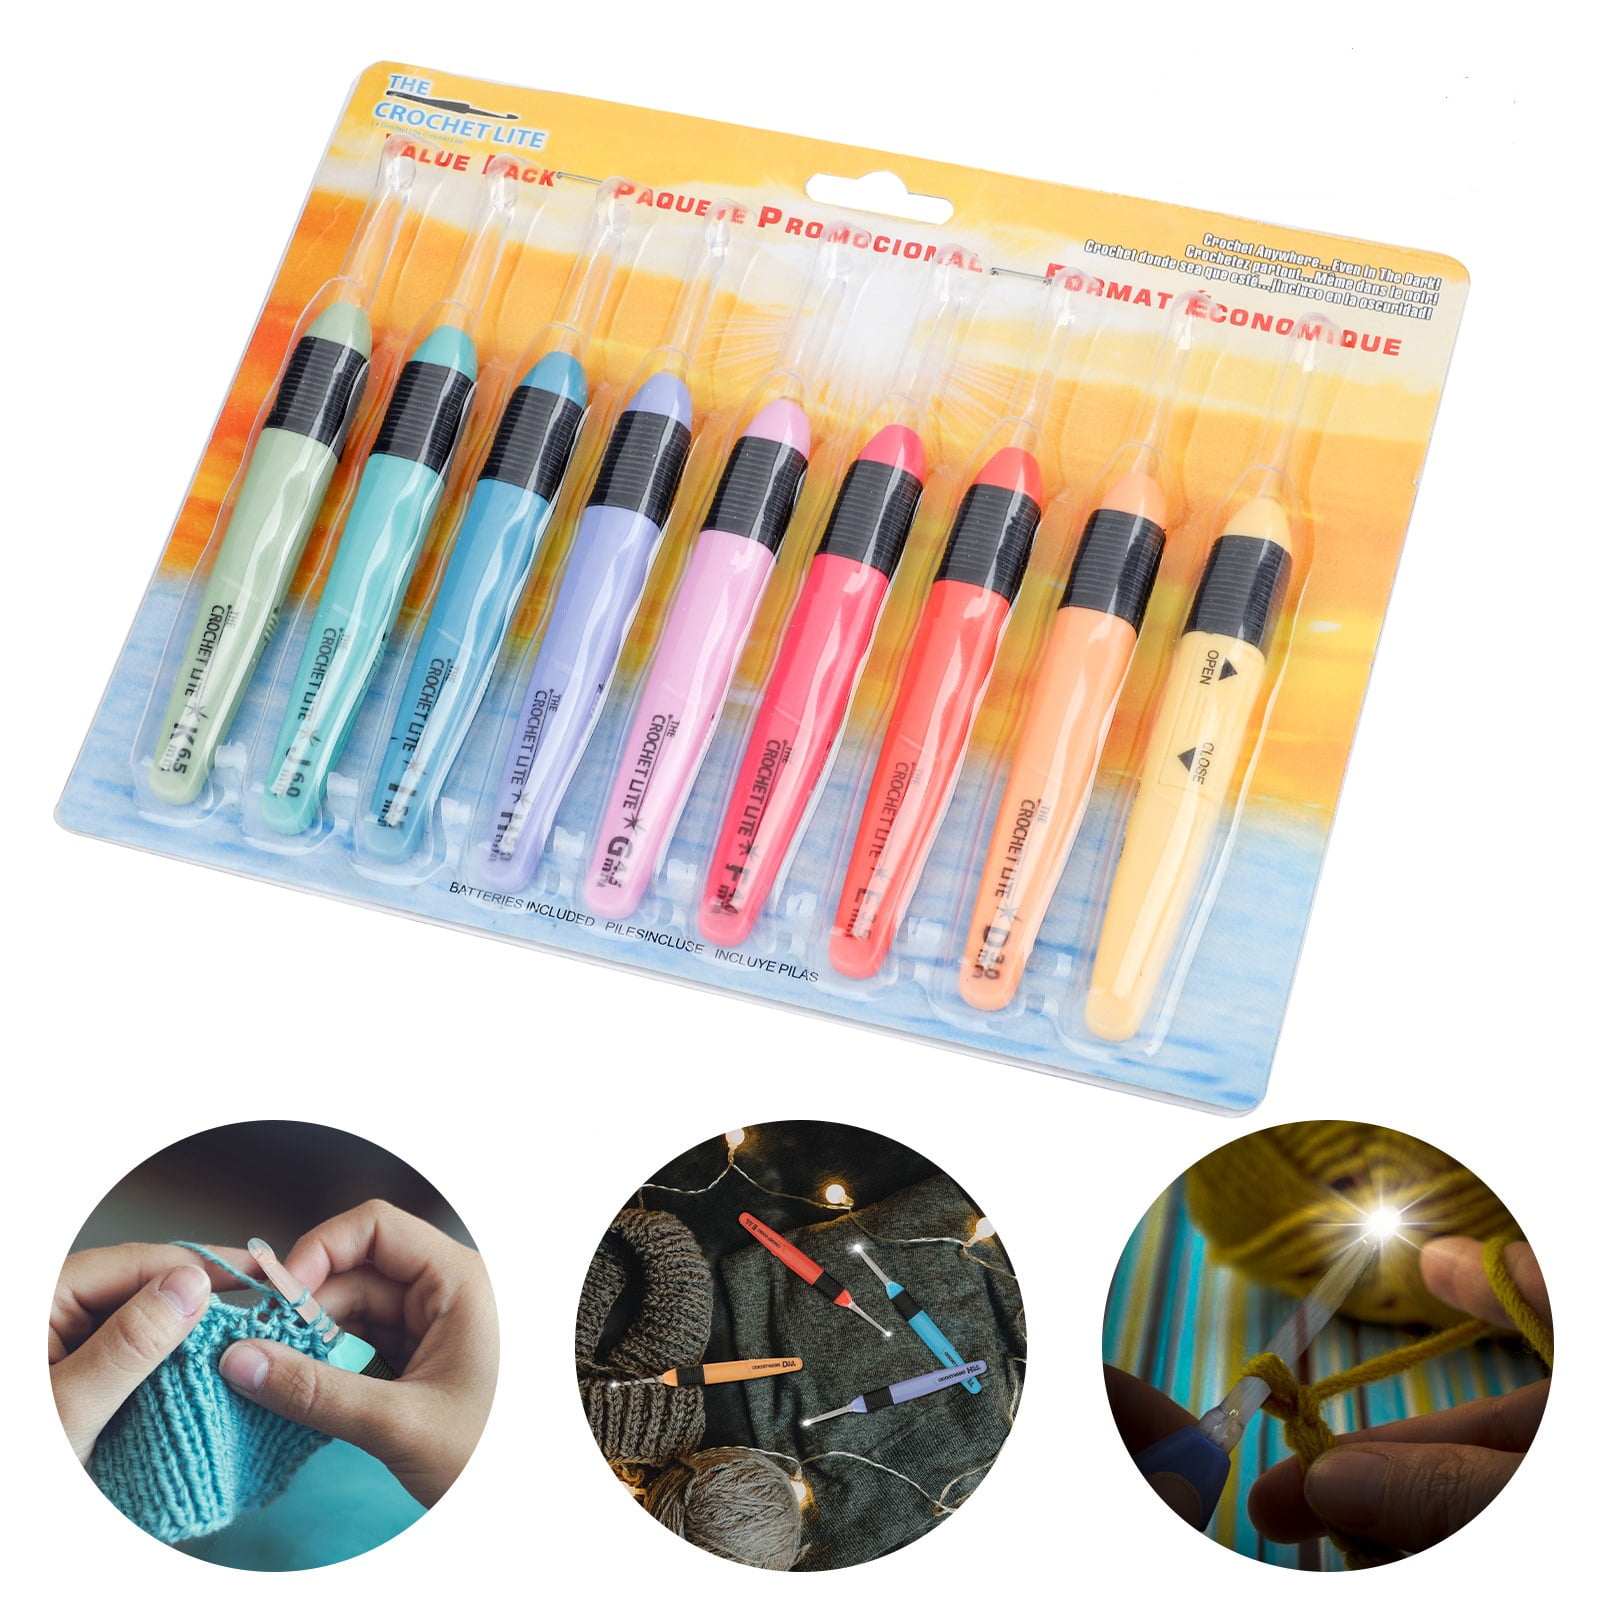 Nghtmre Lighted Crochet Hooks Set- Multiple Sizes and Colors Available? Ergonomic Grip Handles & Organizer. Color Coded Illuminated 9